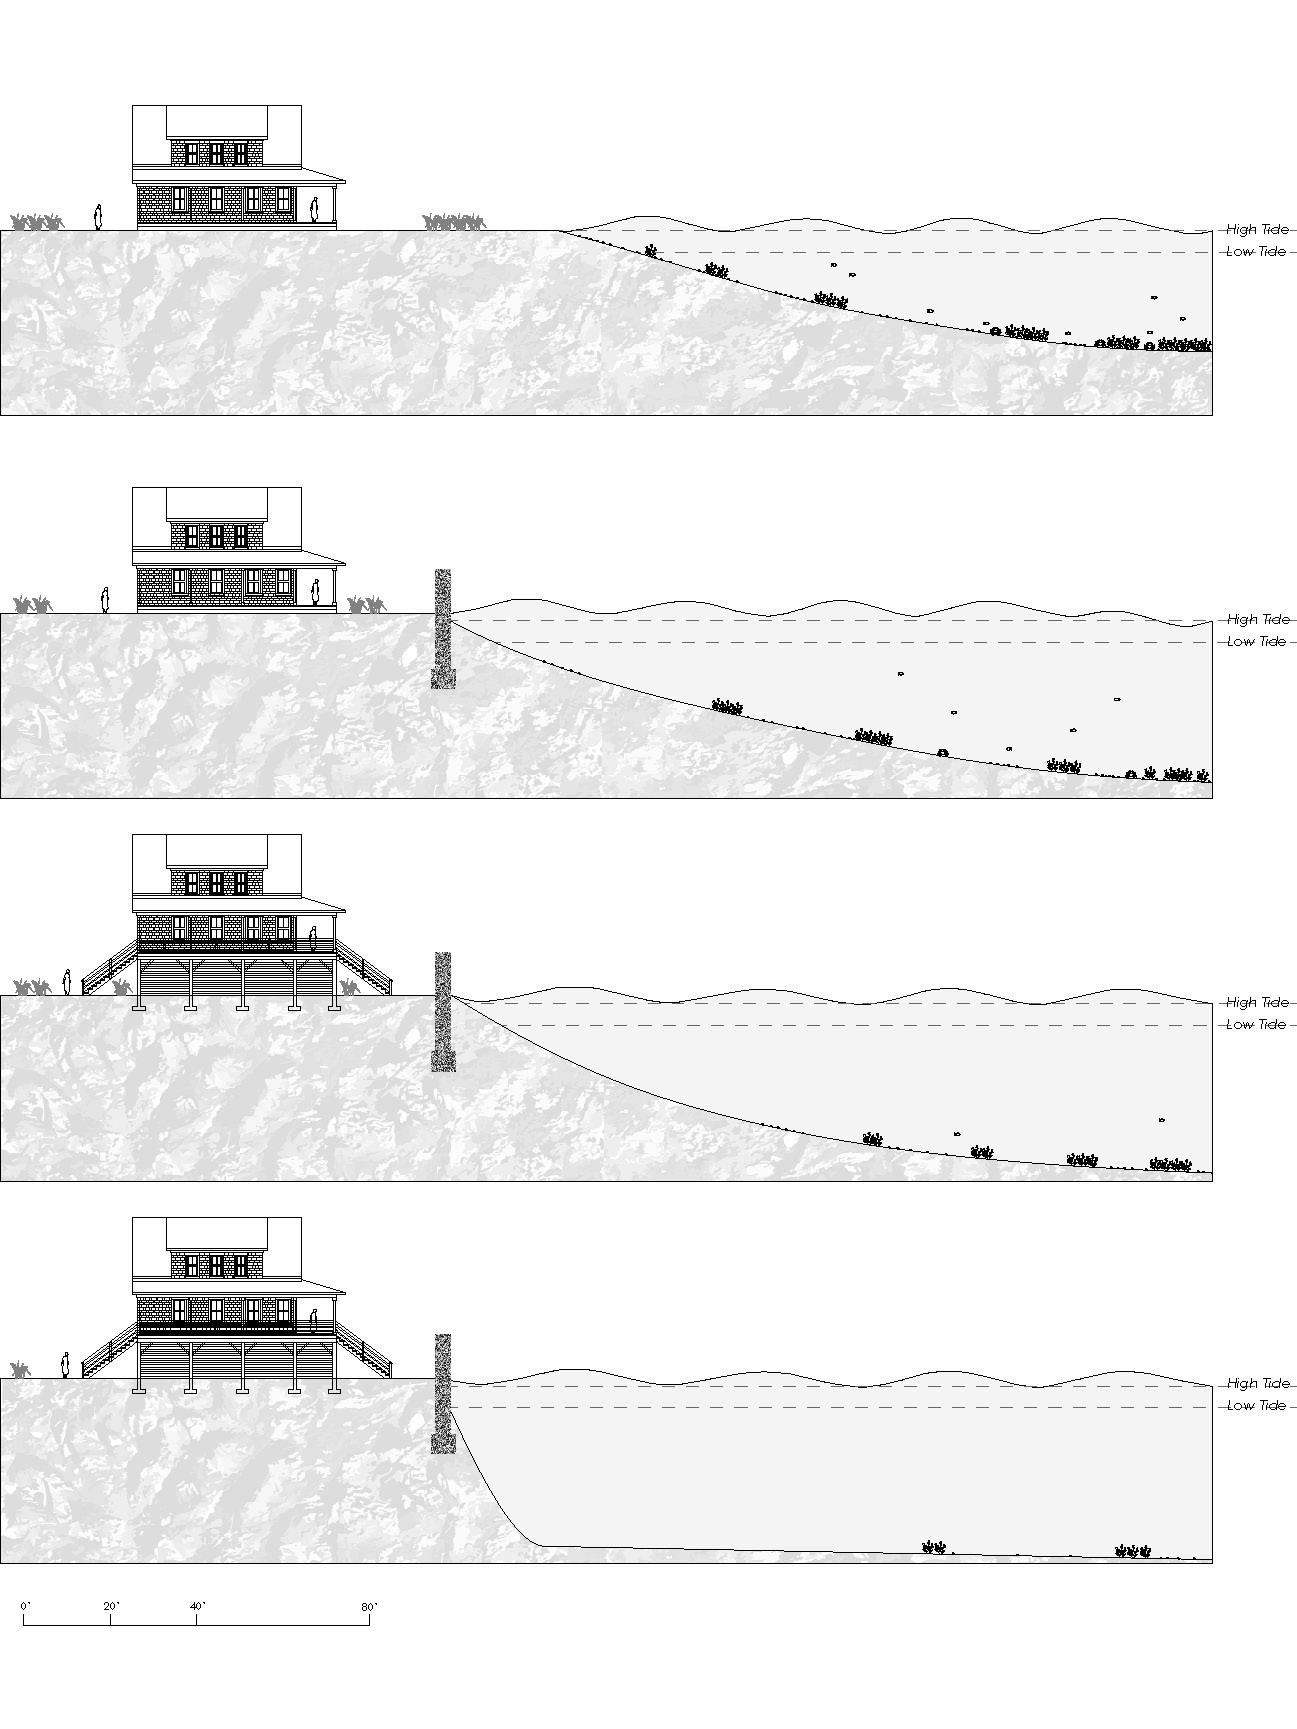 Series of section showing effect of seawall construction as a way to mitigate coastal erosion.